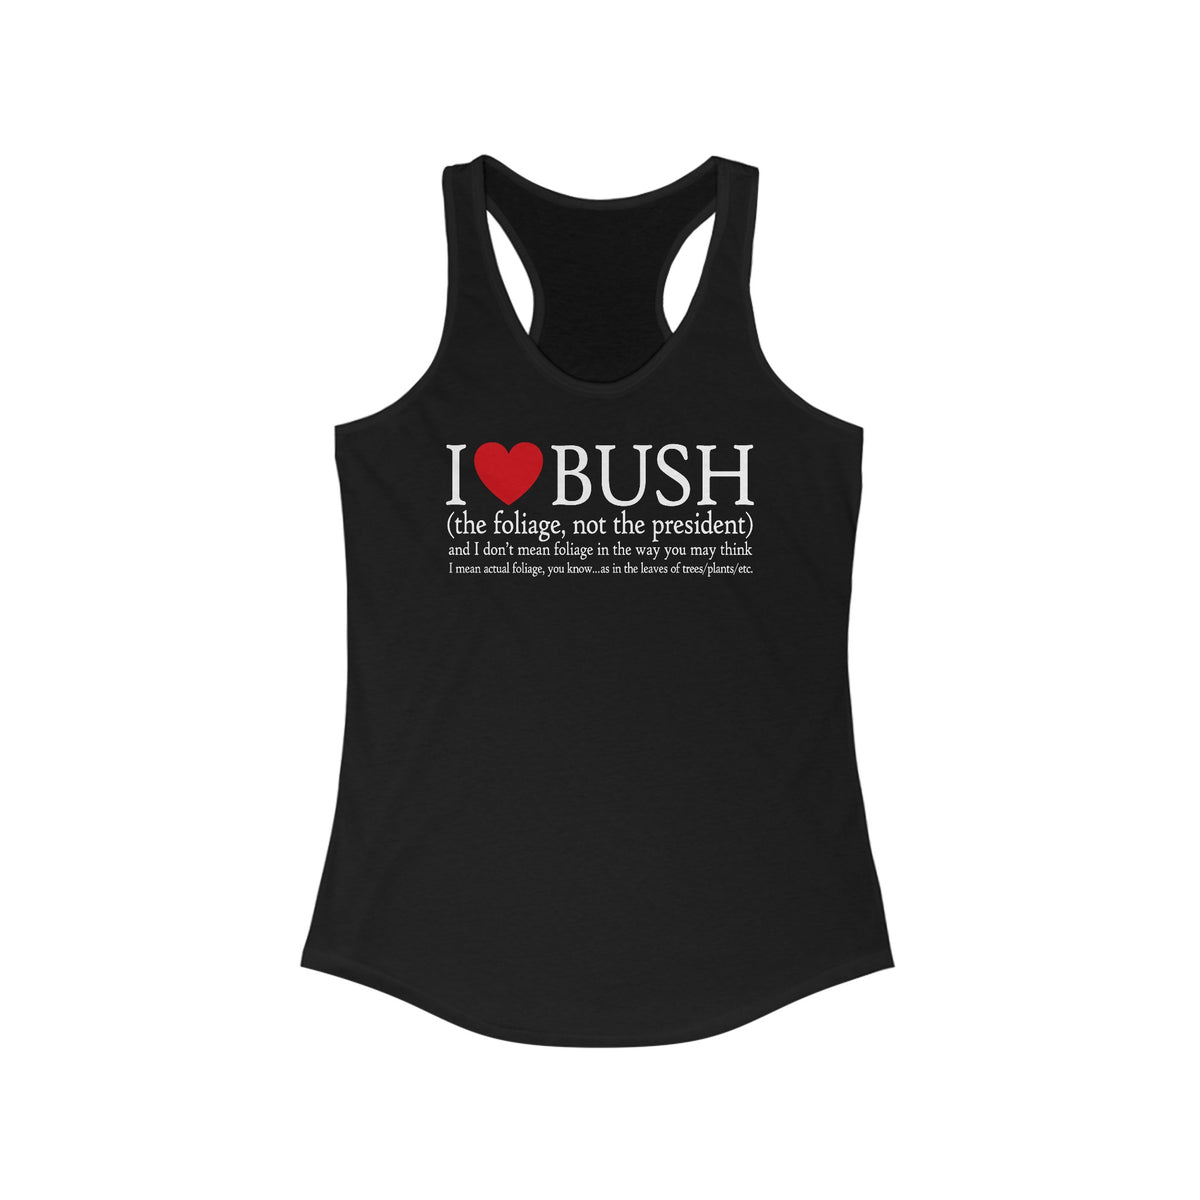 I Love Bush! (The Foliage Not The President)- And I Don't Mean Foliage The Way You May Think - Women’s Racerback Tank